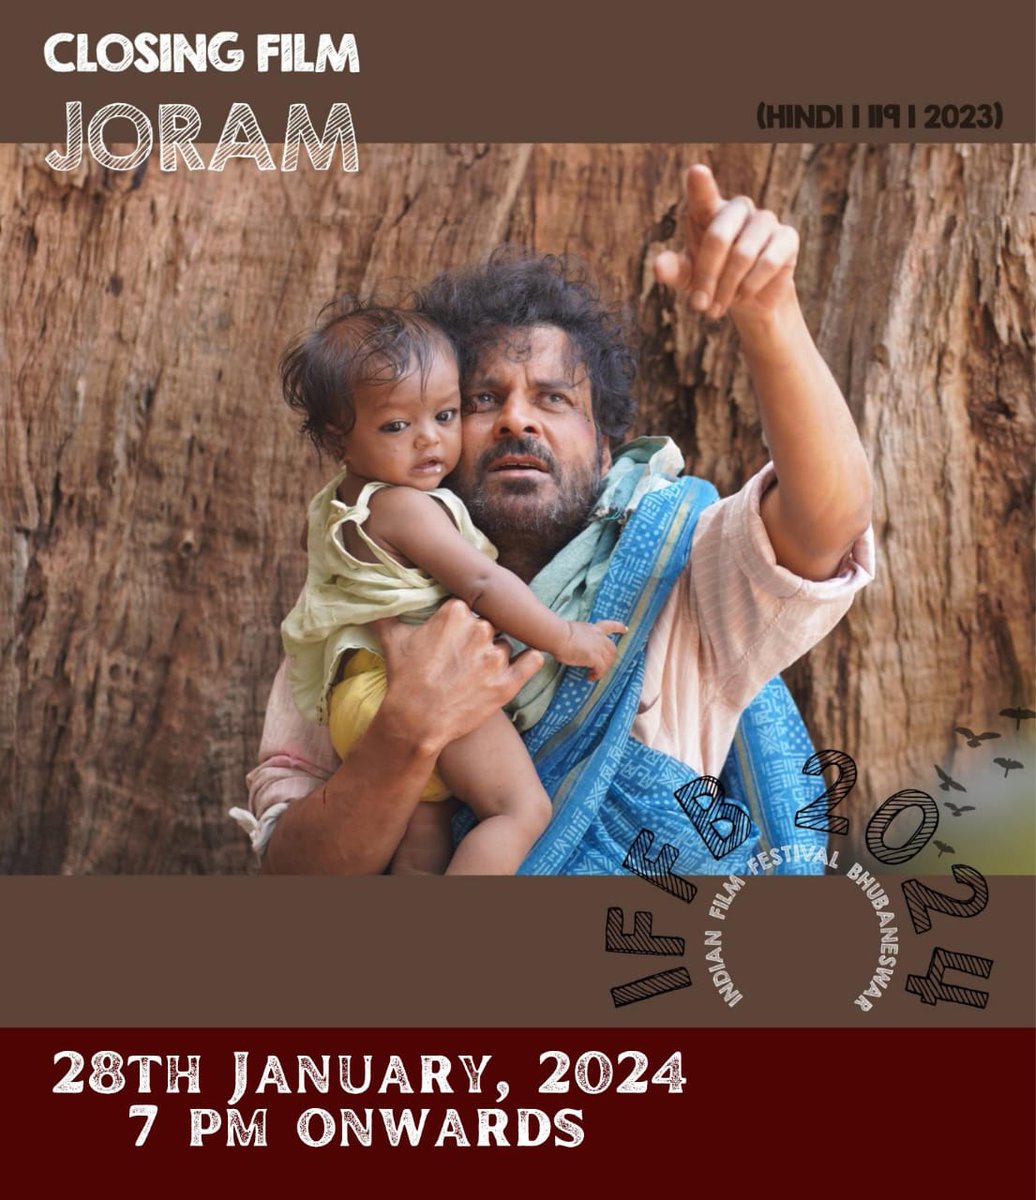 A desperate man and his infant daughter fleeing a system that want them crushed at any cost. @nakdindianfakir @Makhijafilm
#Joram #Bhubaneswar #IFFB24 #FilmFestival